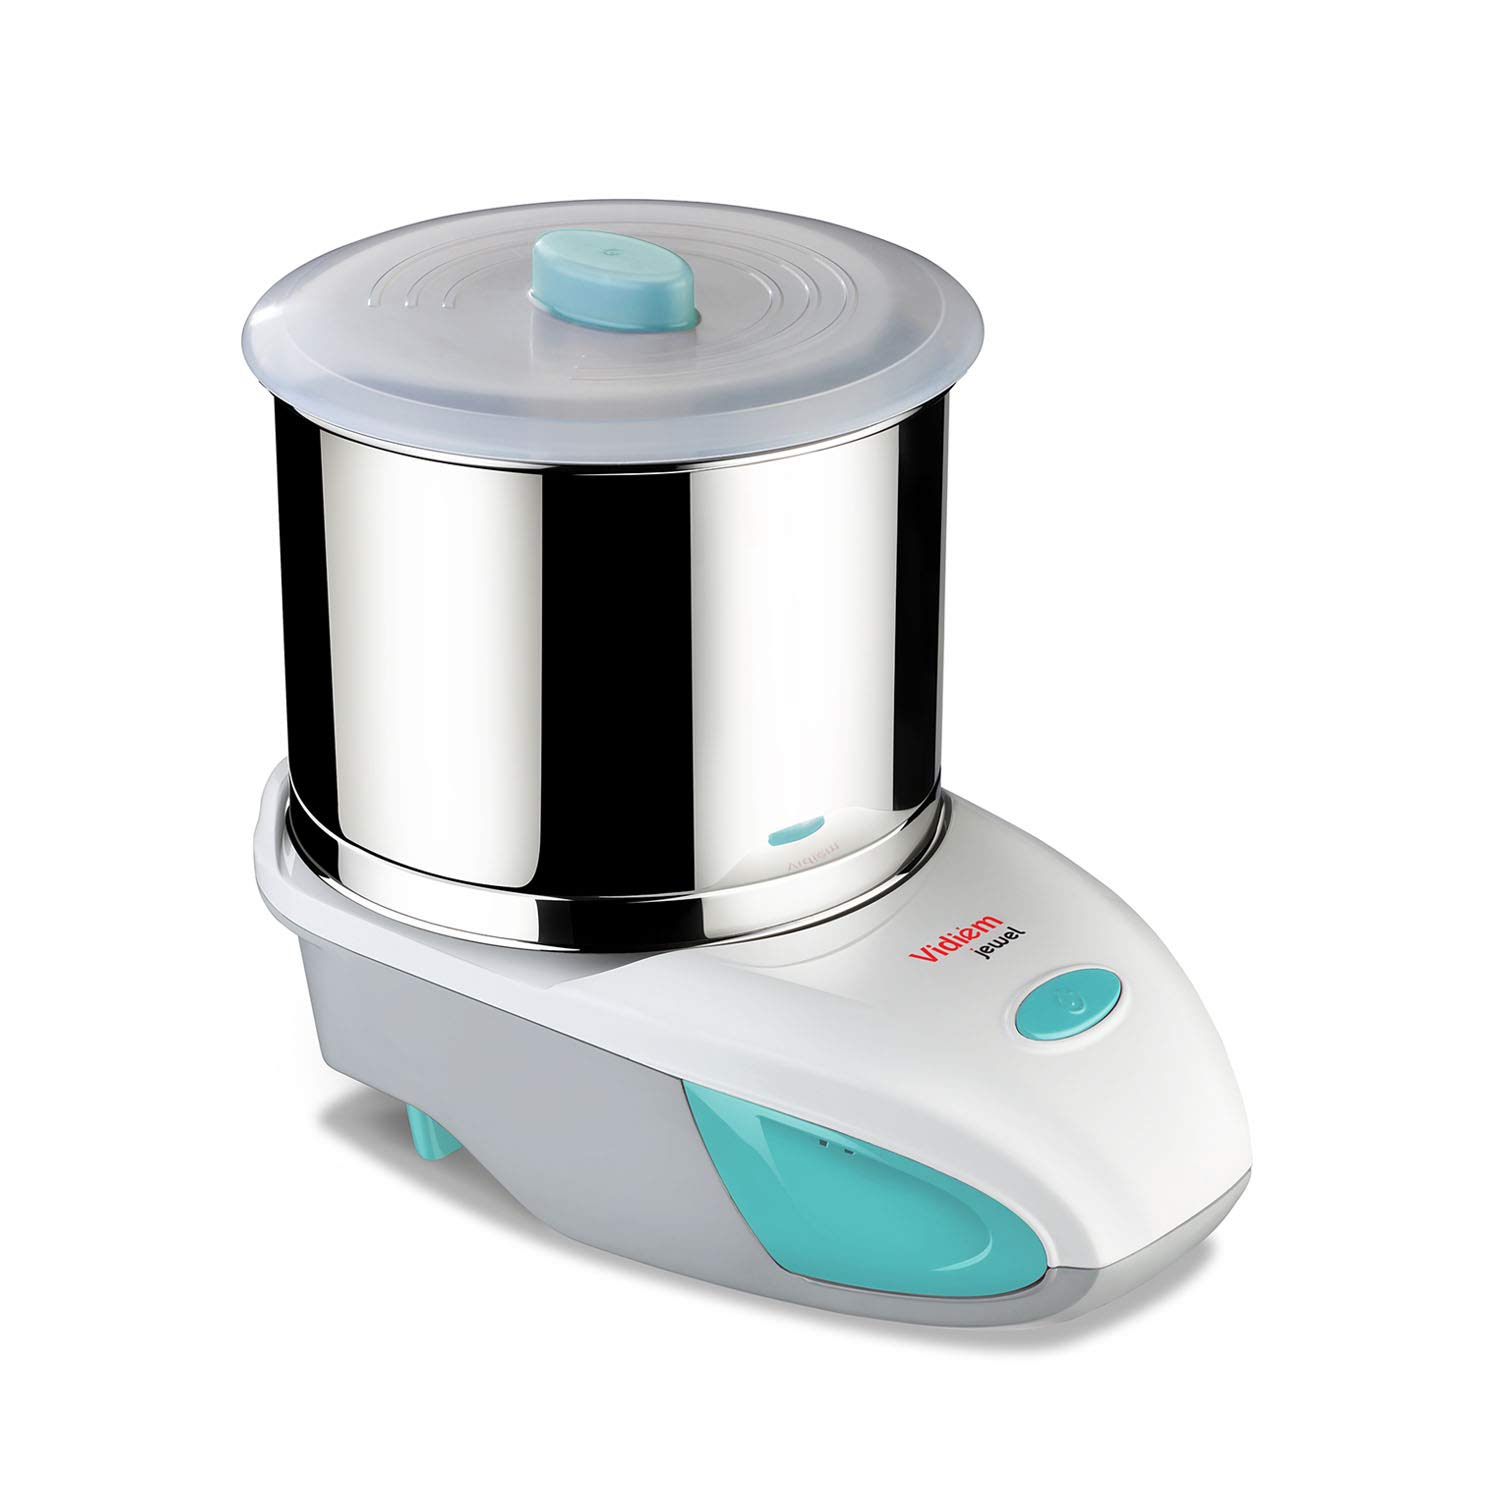 Vidiem Jewel Mini Table Top Wet Grinder - Lightweight 1.5 Ltr 110V/ 90W with it's Motor RPM 1440 and Drum RPM 150